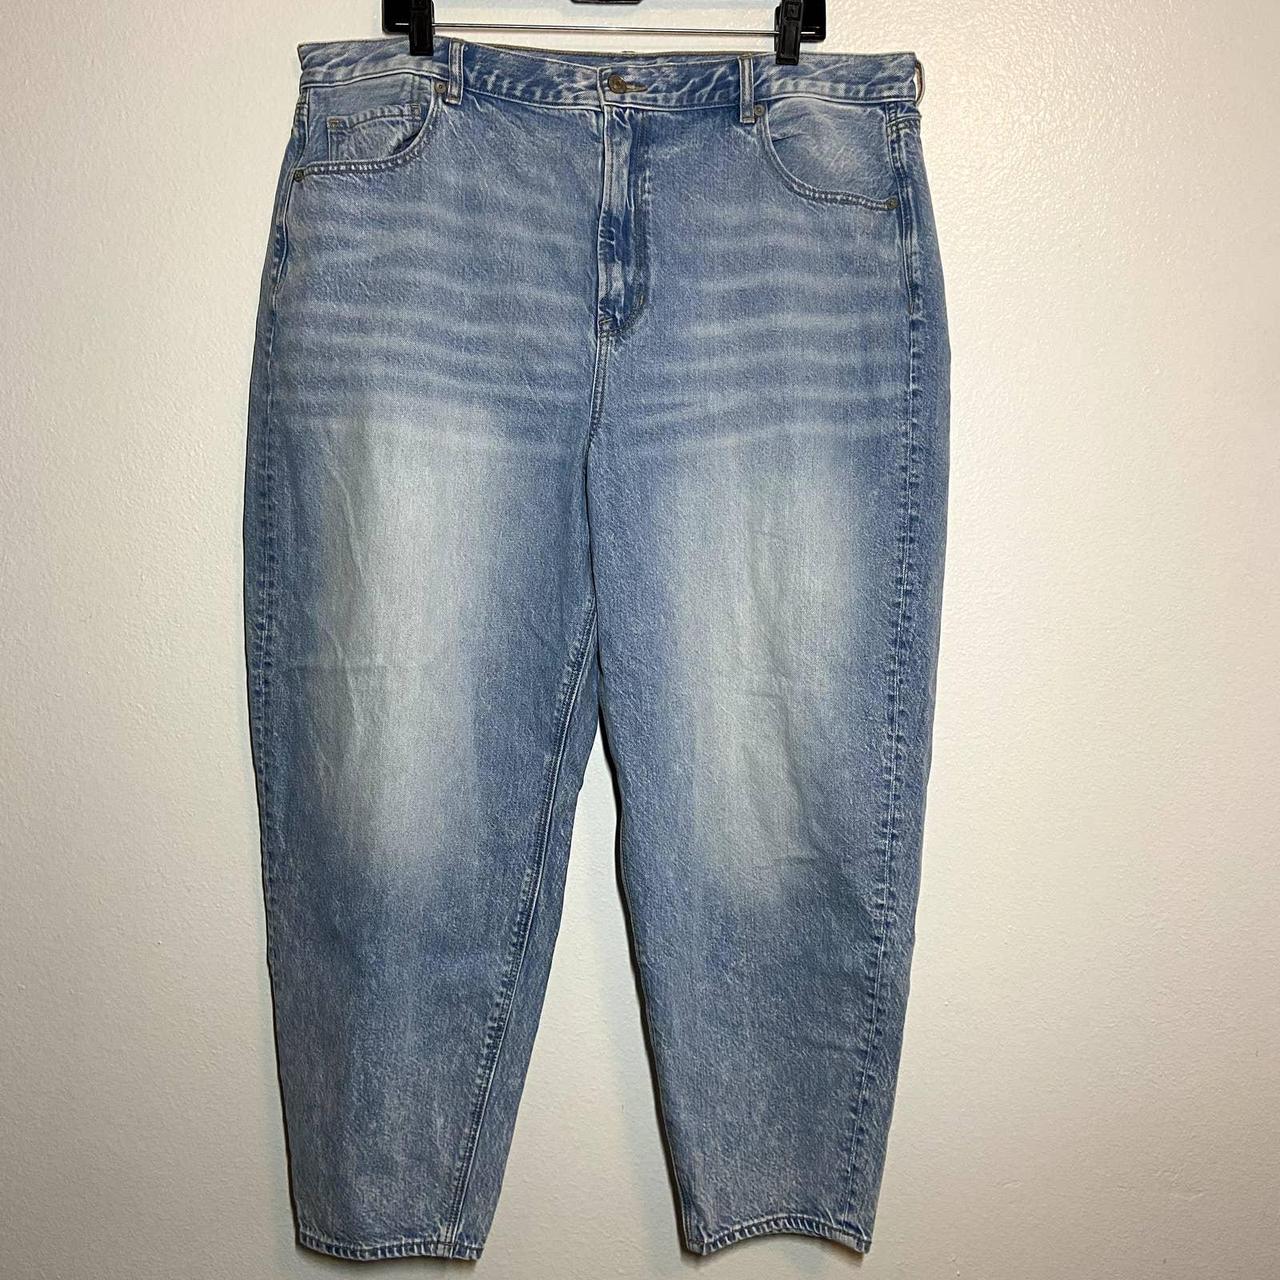 American Eagle Relaxed Mom Jean Glowing Light Wash... - Depop